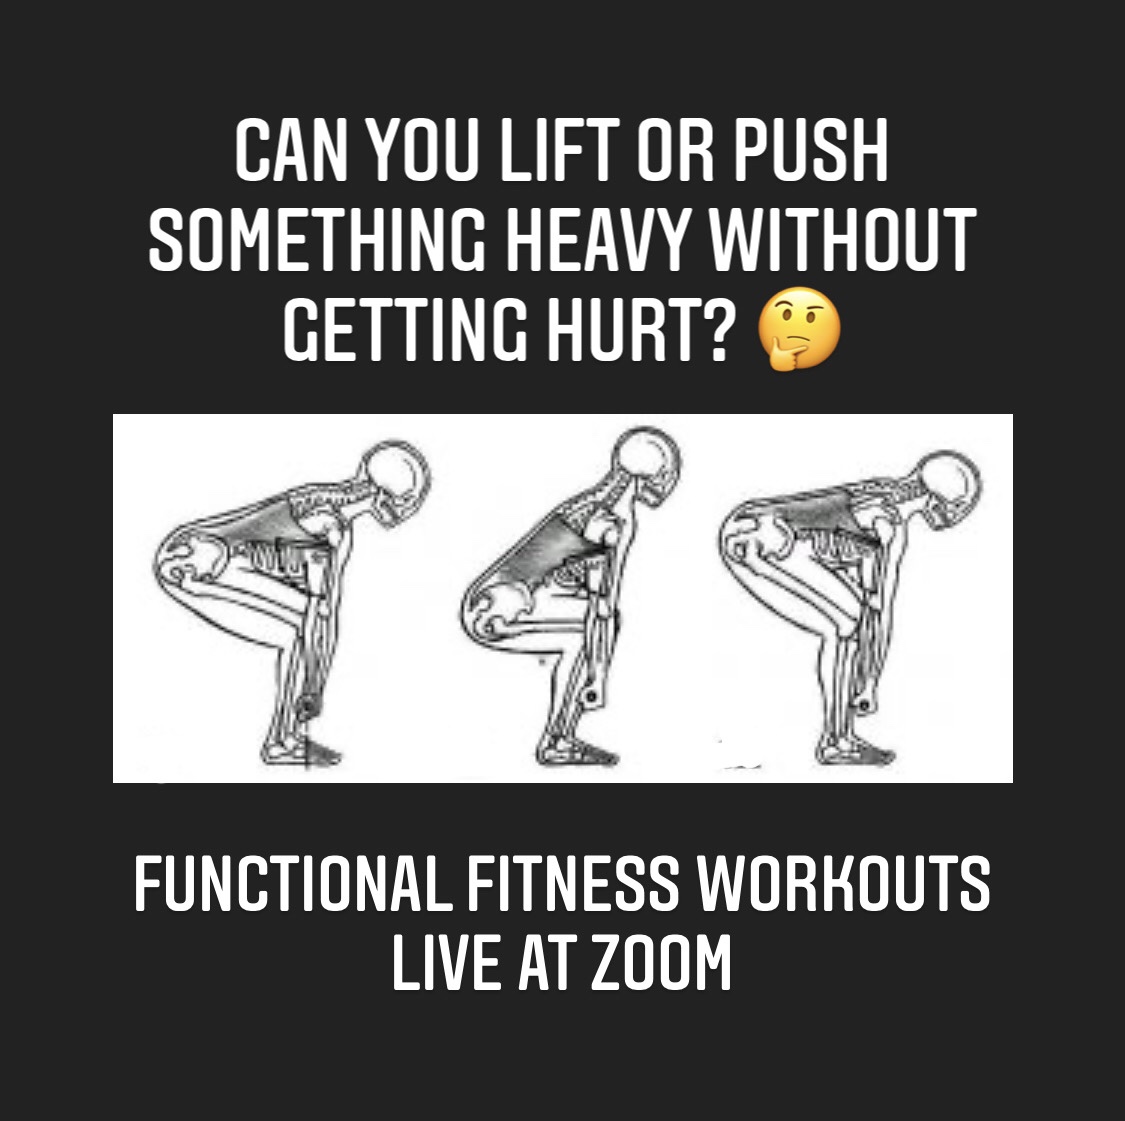 #FunctionalFitnessWorkout Live at Zoom - mailchi.mp/b94afb3d0770/m…
My favorite class: Energy Release. Every Wednesday at 6pm: #30minworkout based oh #functionalmovements with the rhythm of a very cool playlist. For all #fitness levels, with low impact options. #LiveatZoom!